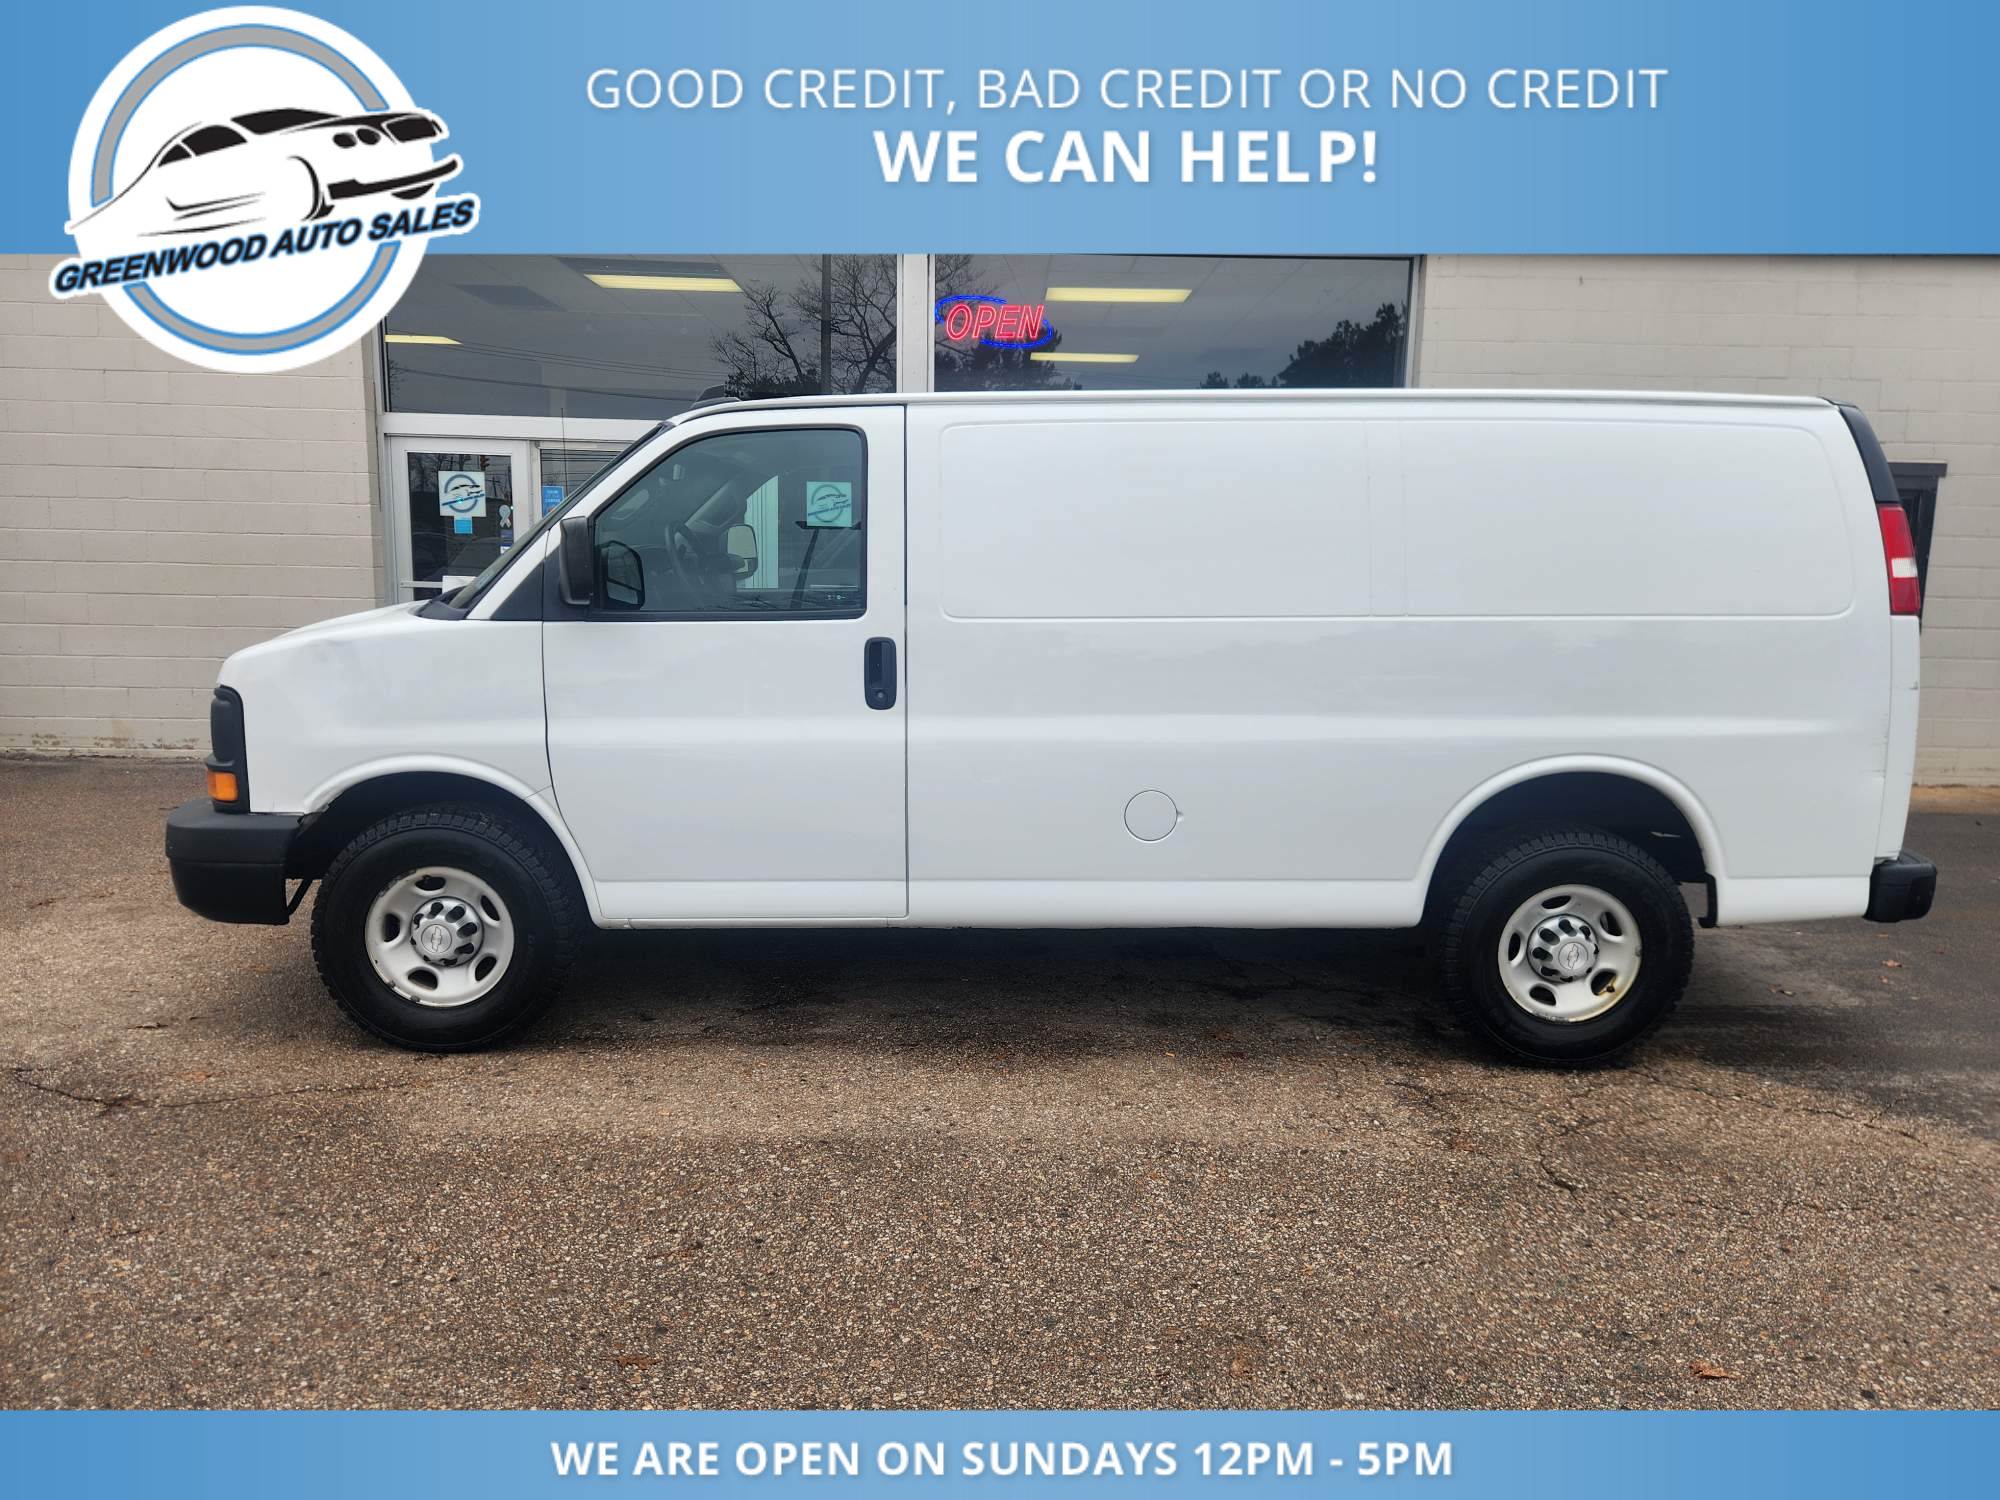 2017 Chevrolet Express 2500 1WT Great Price, Ready For Work,Fresh Mvi... Work 